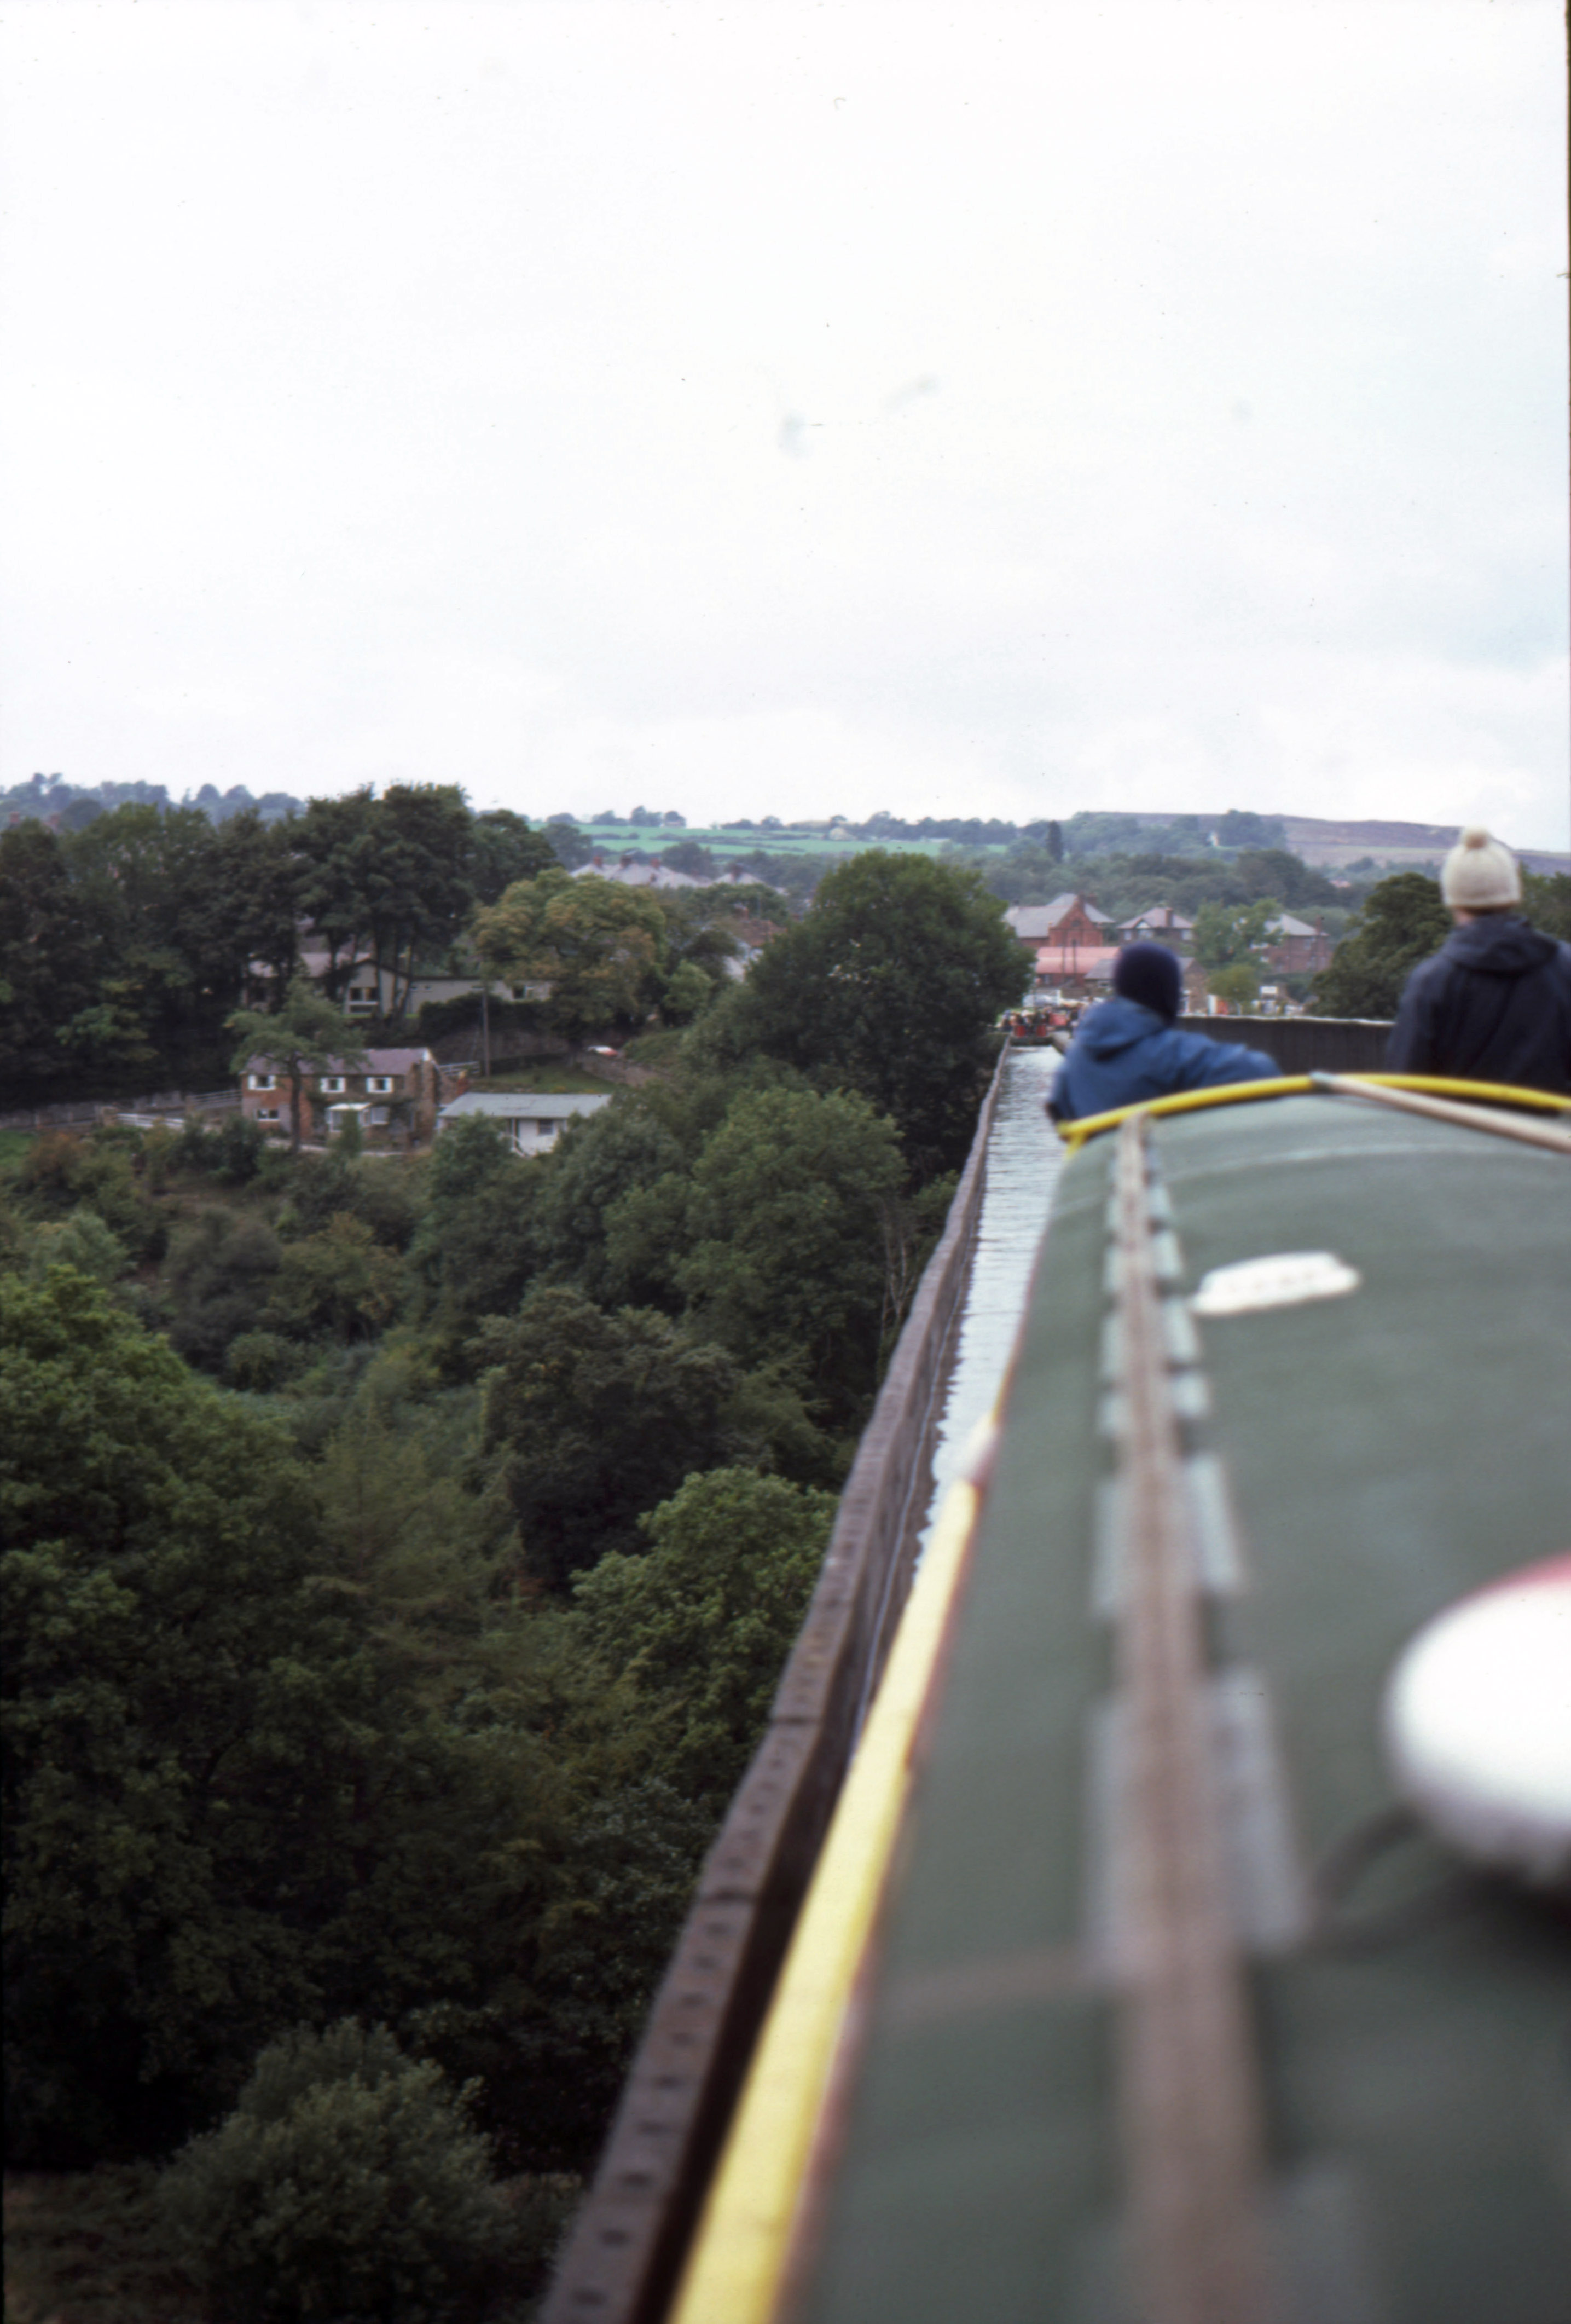 8408320 Sep 1984 Going across the Pontcysyllte Aqueduct was quite scary as there was no footpath on the left - just the metal edge of the canal trough.